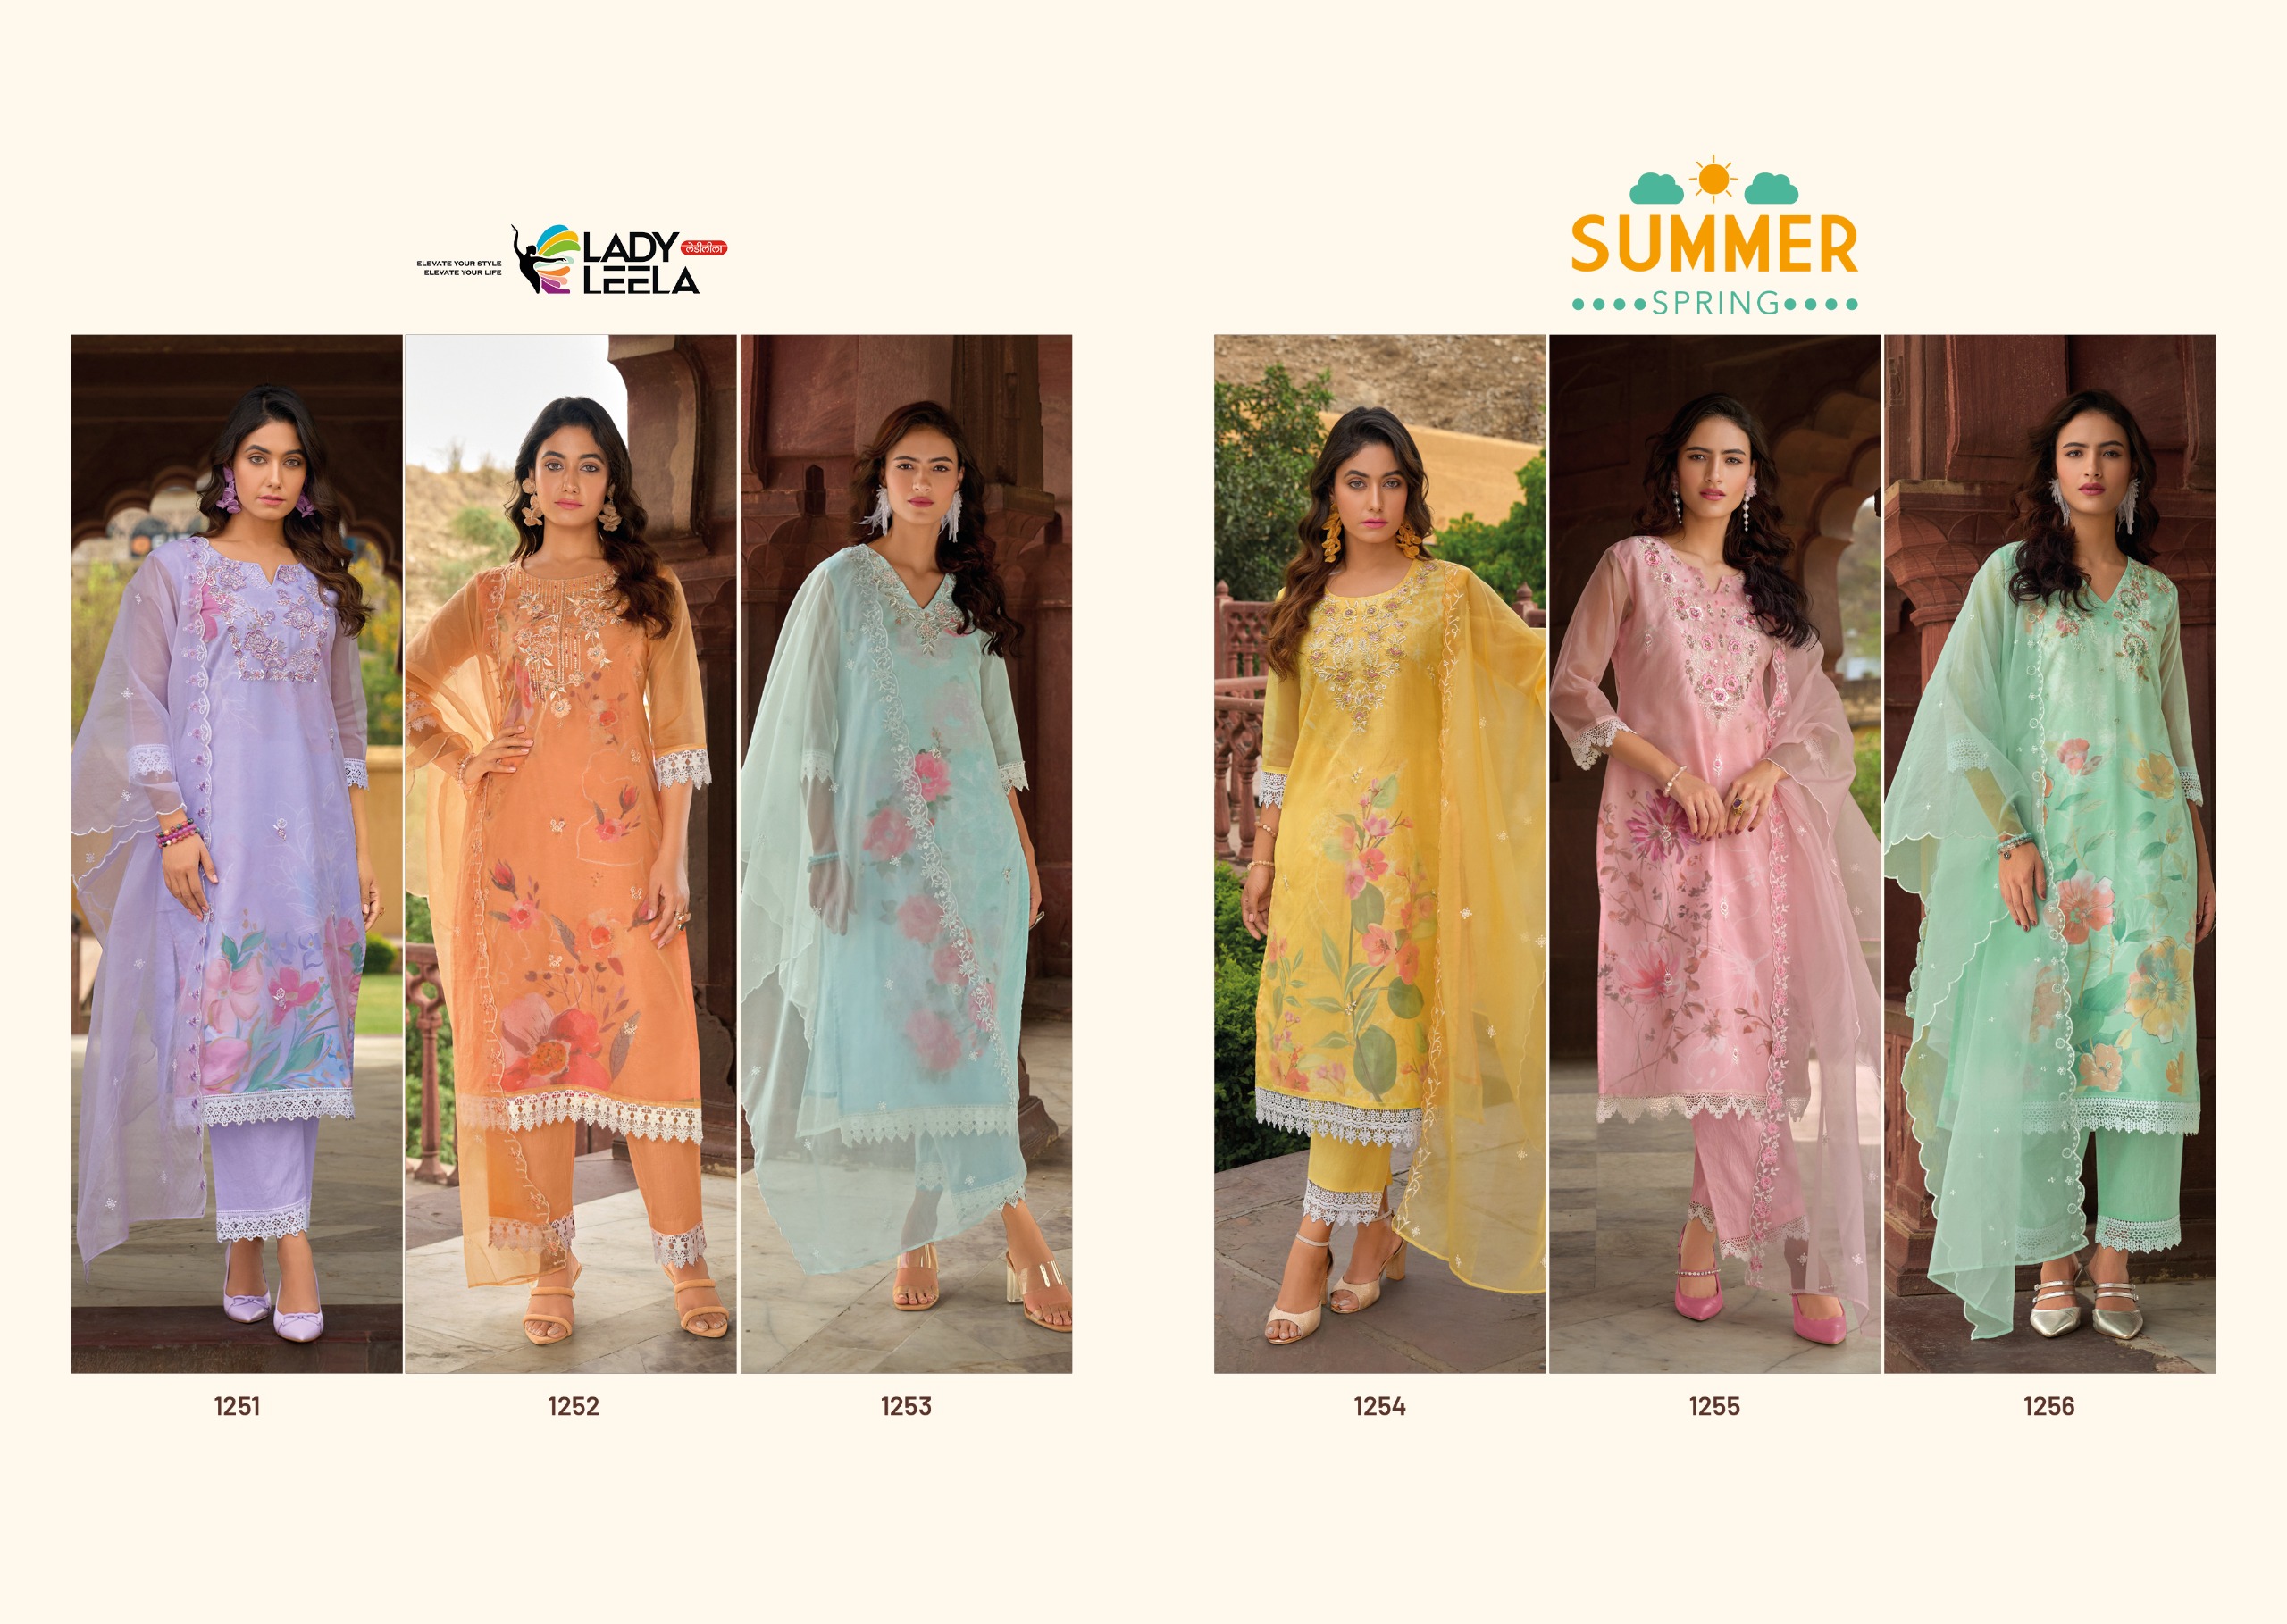 Lady Leela Summer Spring collection 2